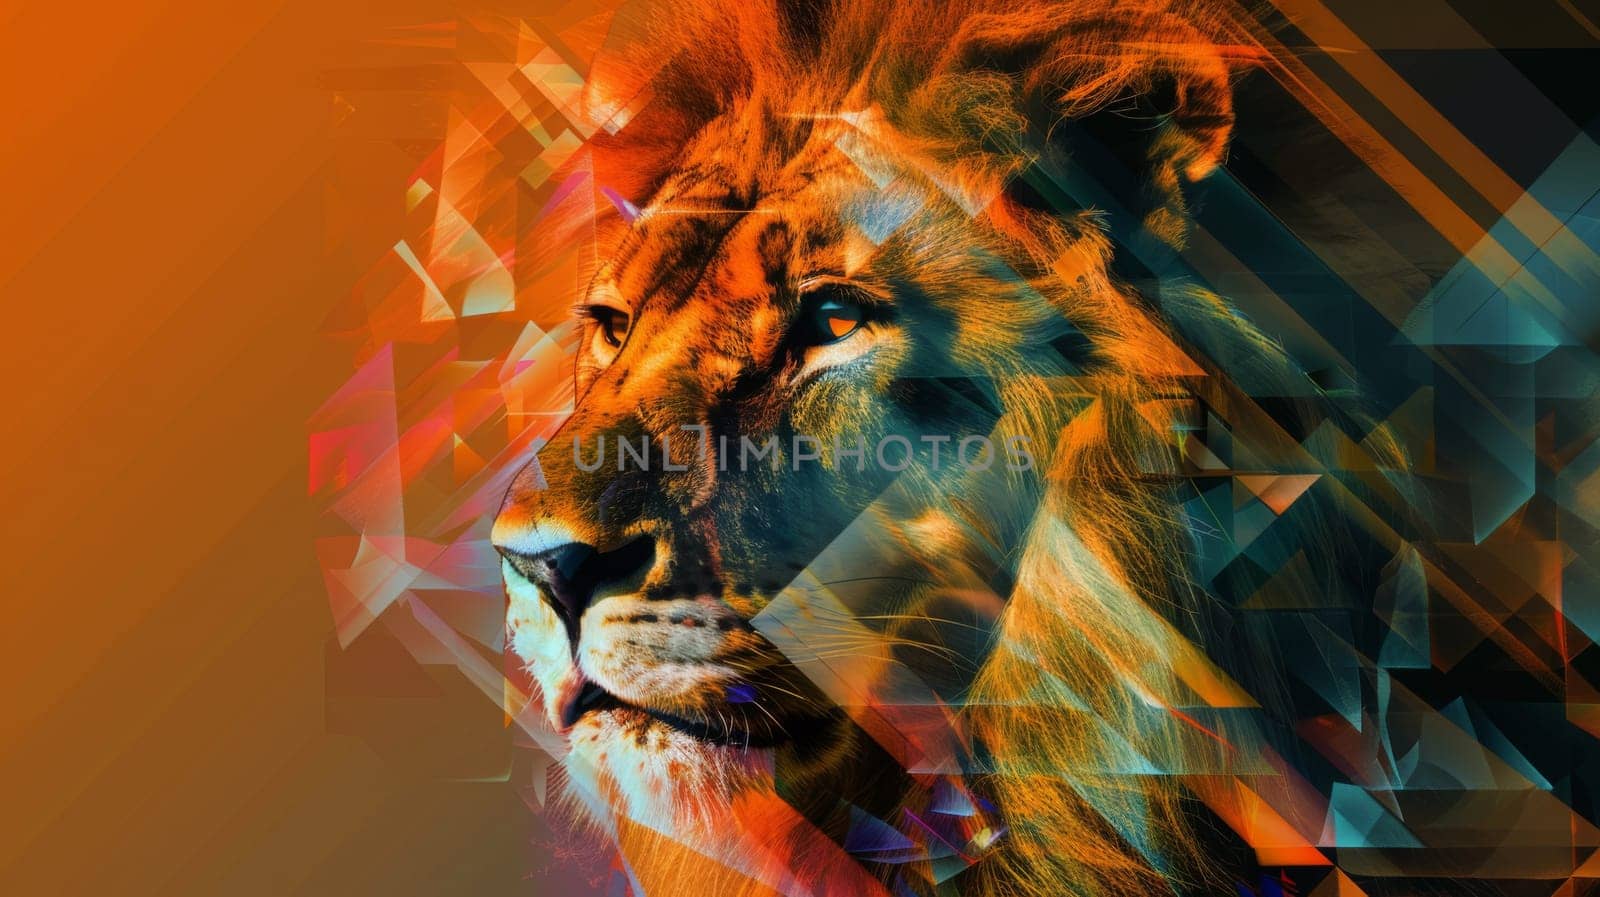 A lion is shown in a geometric pattern with orange and blue colors